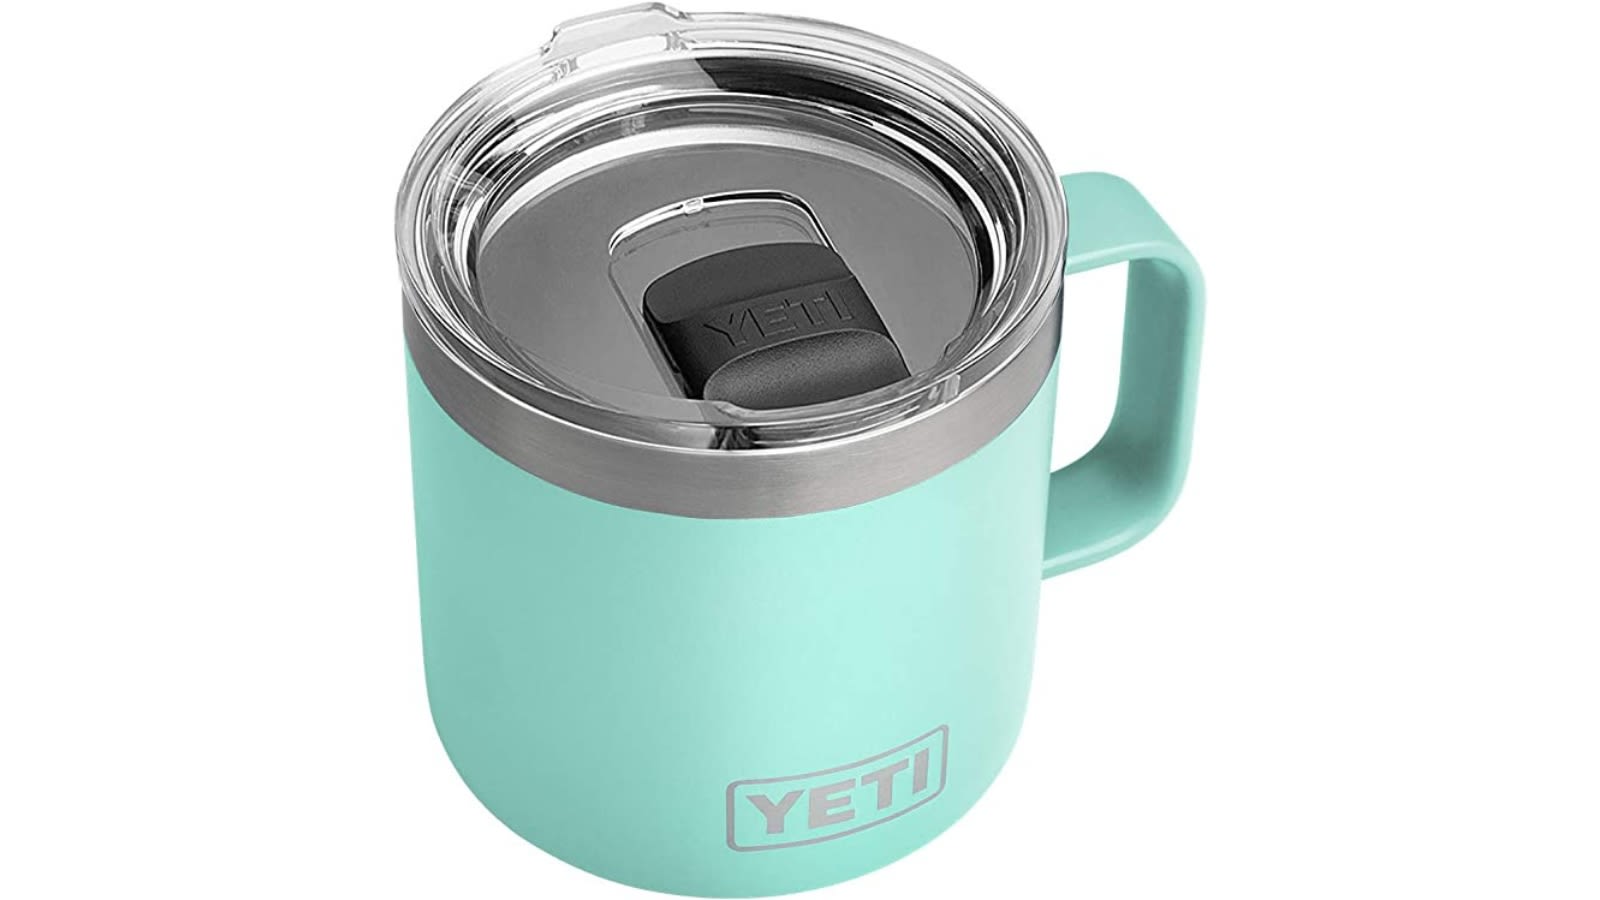 The Best Yeti Labor Day Sales: 20% Off The Tundra 45 Cooler And More -  Forbes Vetted